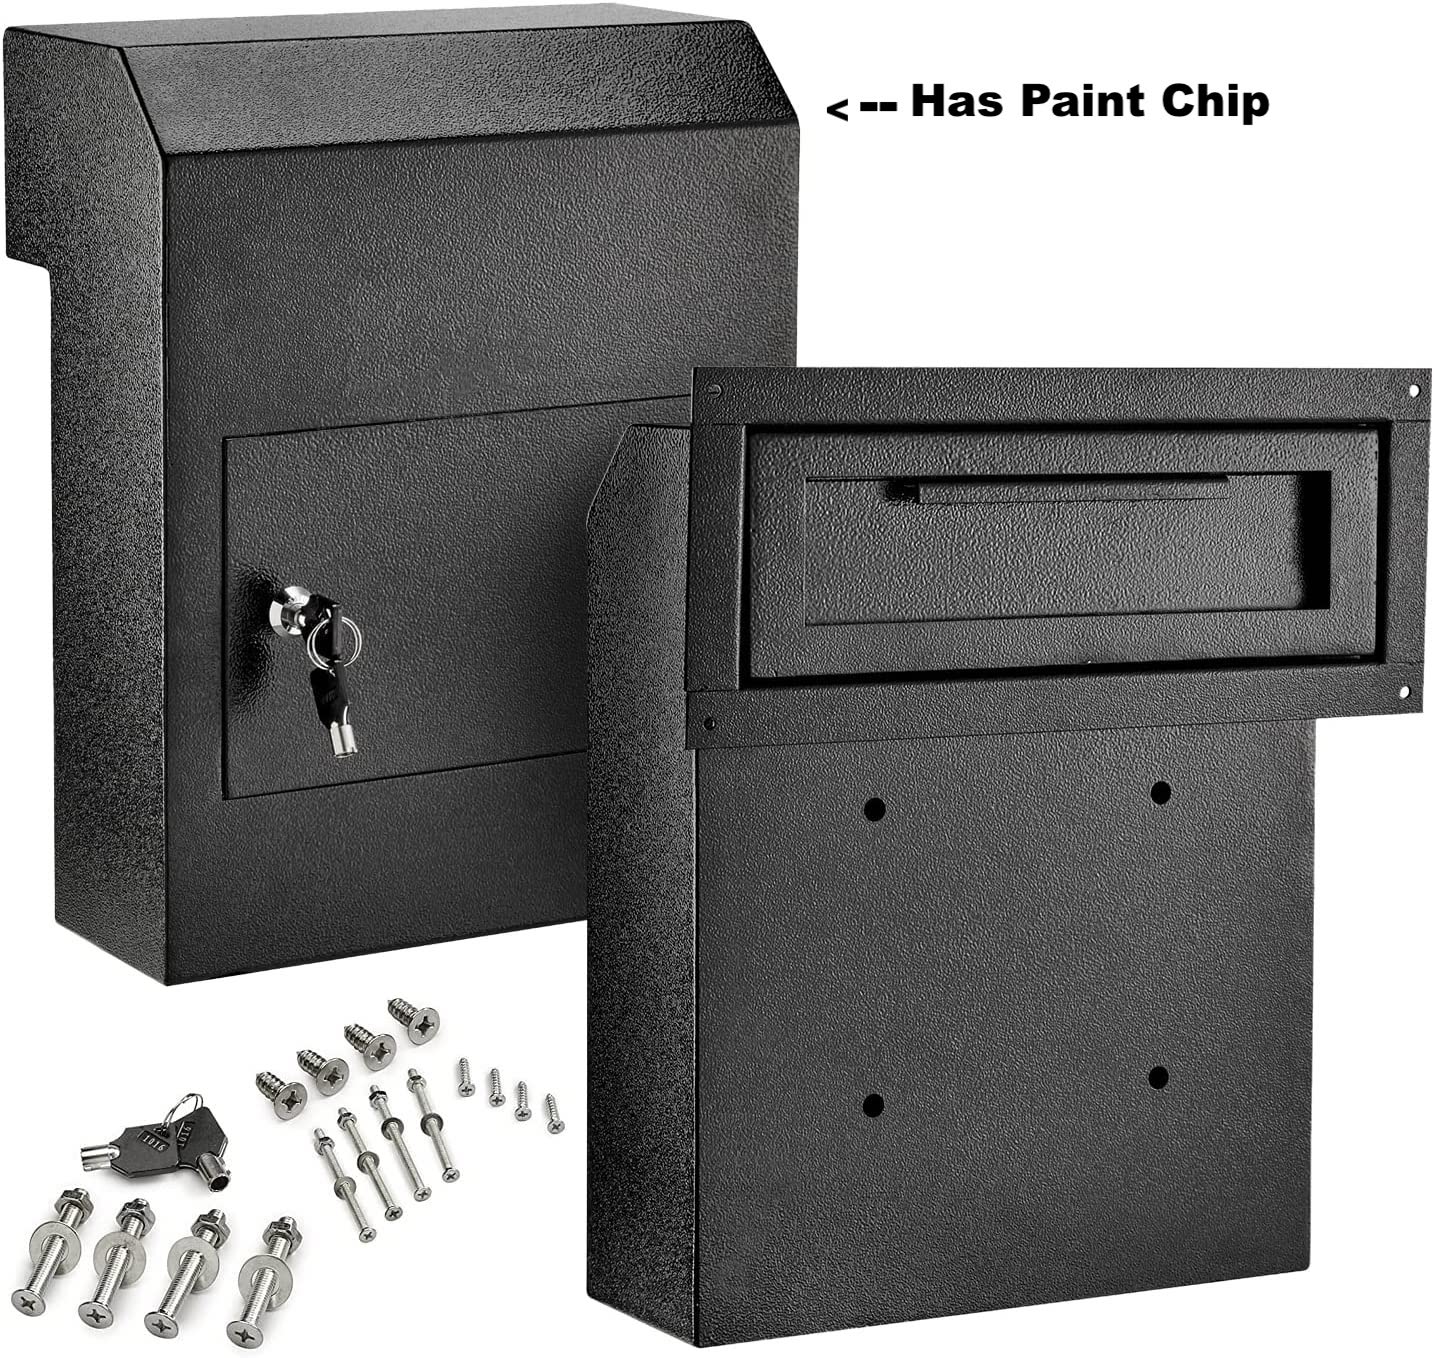 New AdirOffice Door Drop Box - Through-The-Door Safe Locking Drop Box - Door Mail Slot (Black) Note: Has paint chip on front right side could fix with paint! Retails $207+